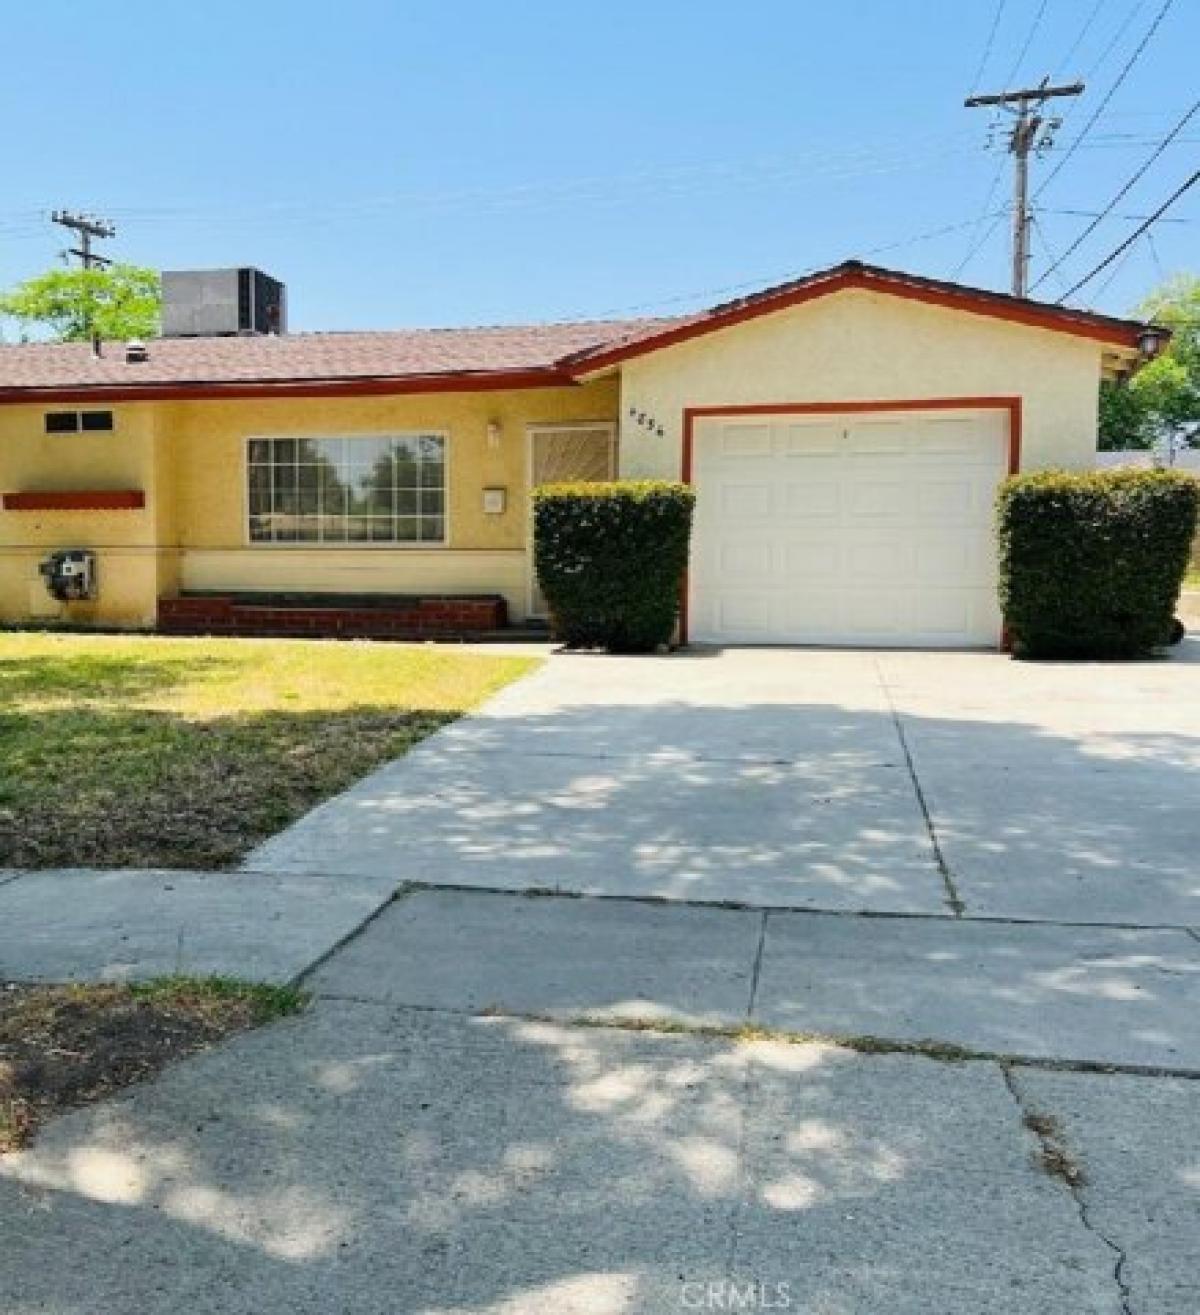 Picture of Home For Sale in San Bernardino, California, United States